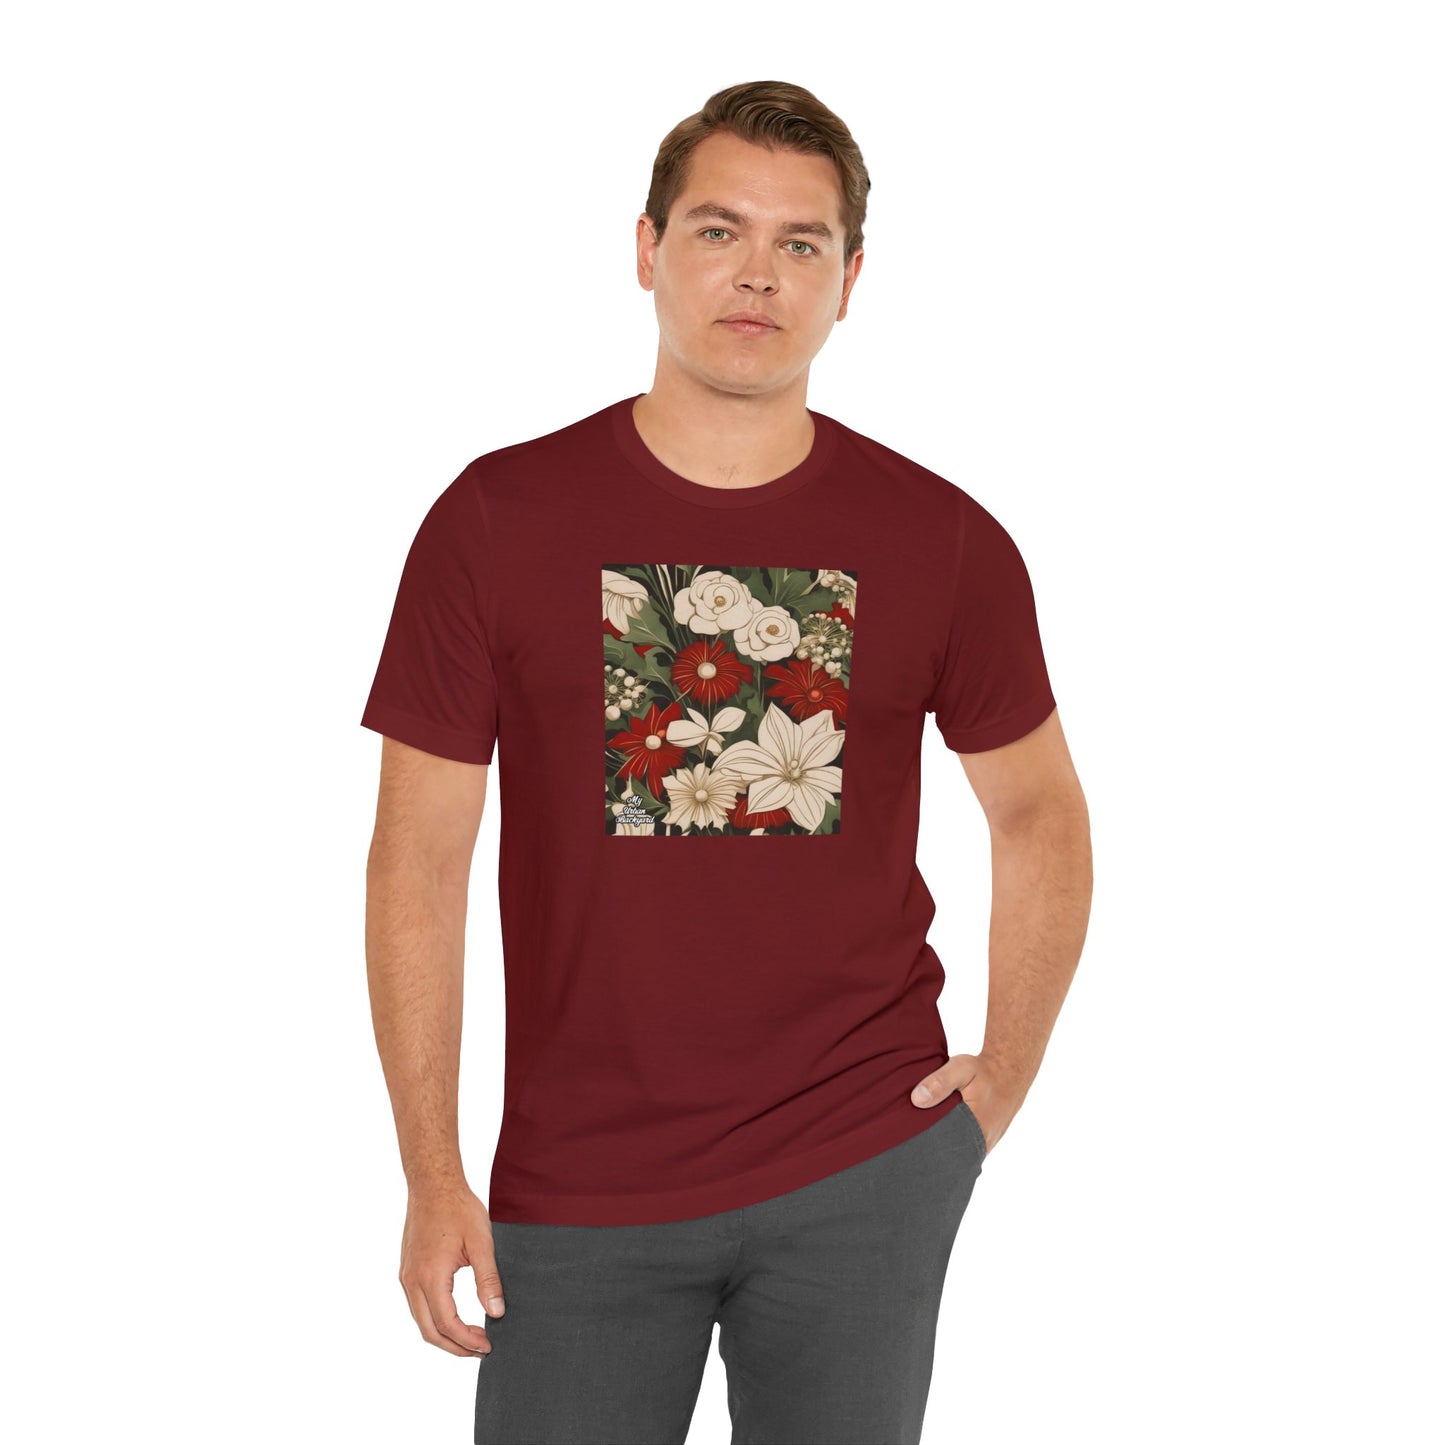 Red & White Flowers, Soft 100% Jersey Cotton T-Shirt, Unisex, Short Sleeve, Retail Fit